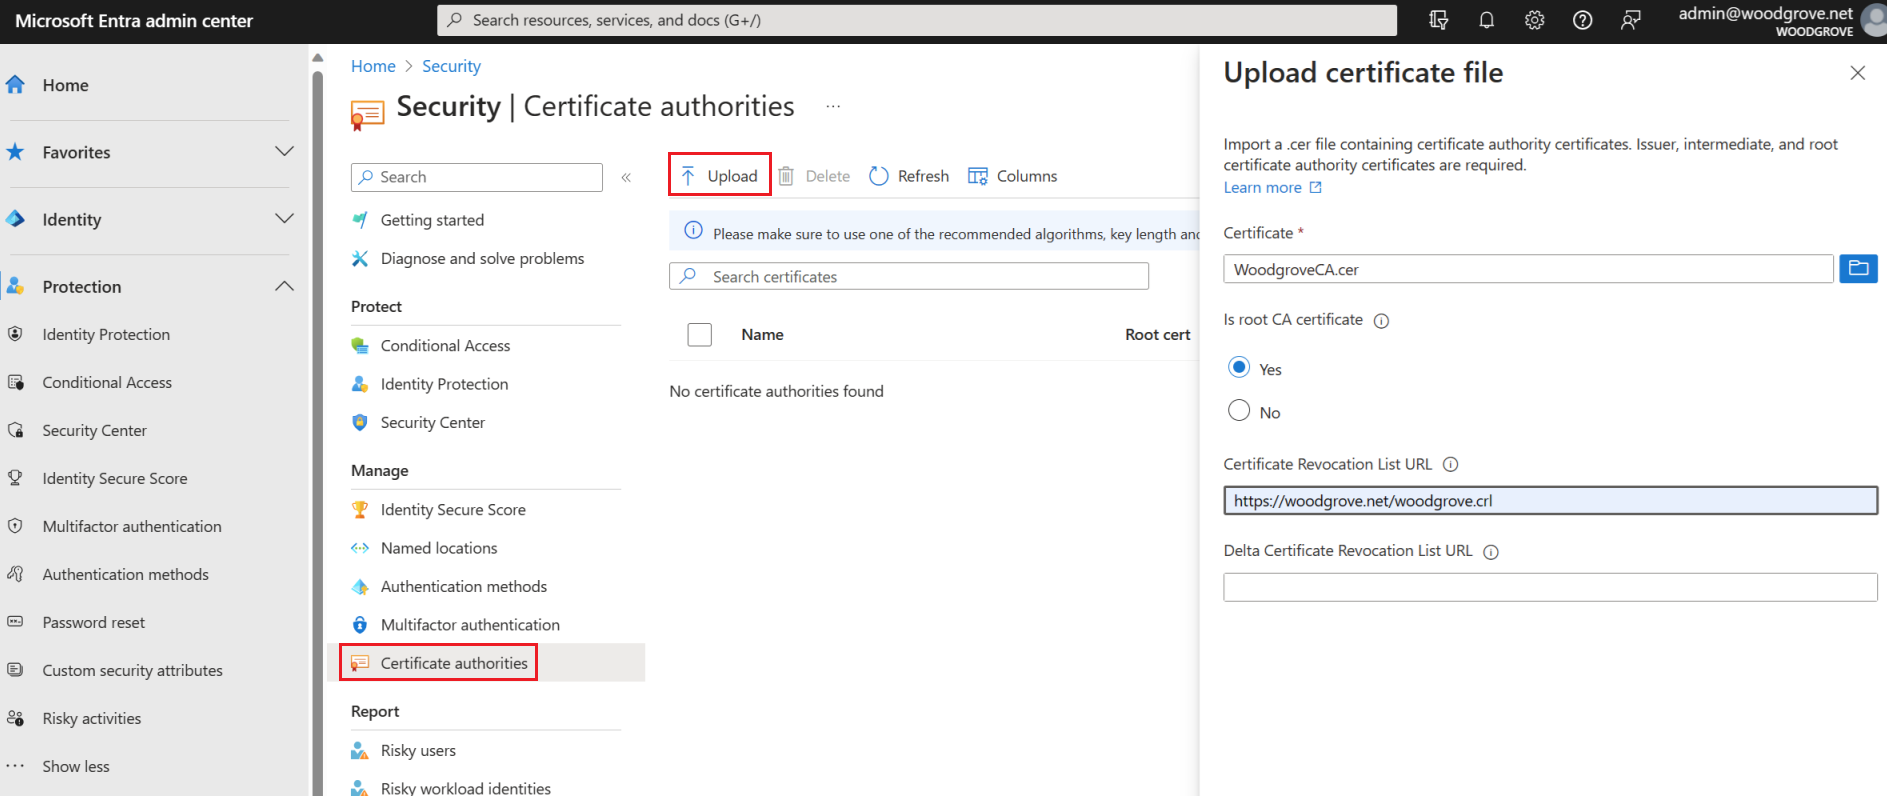 Screenshot of how to upload certification authority file.